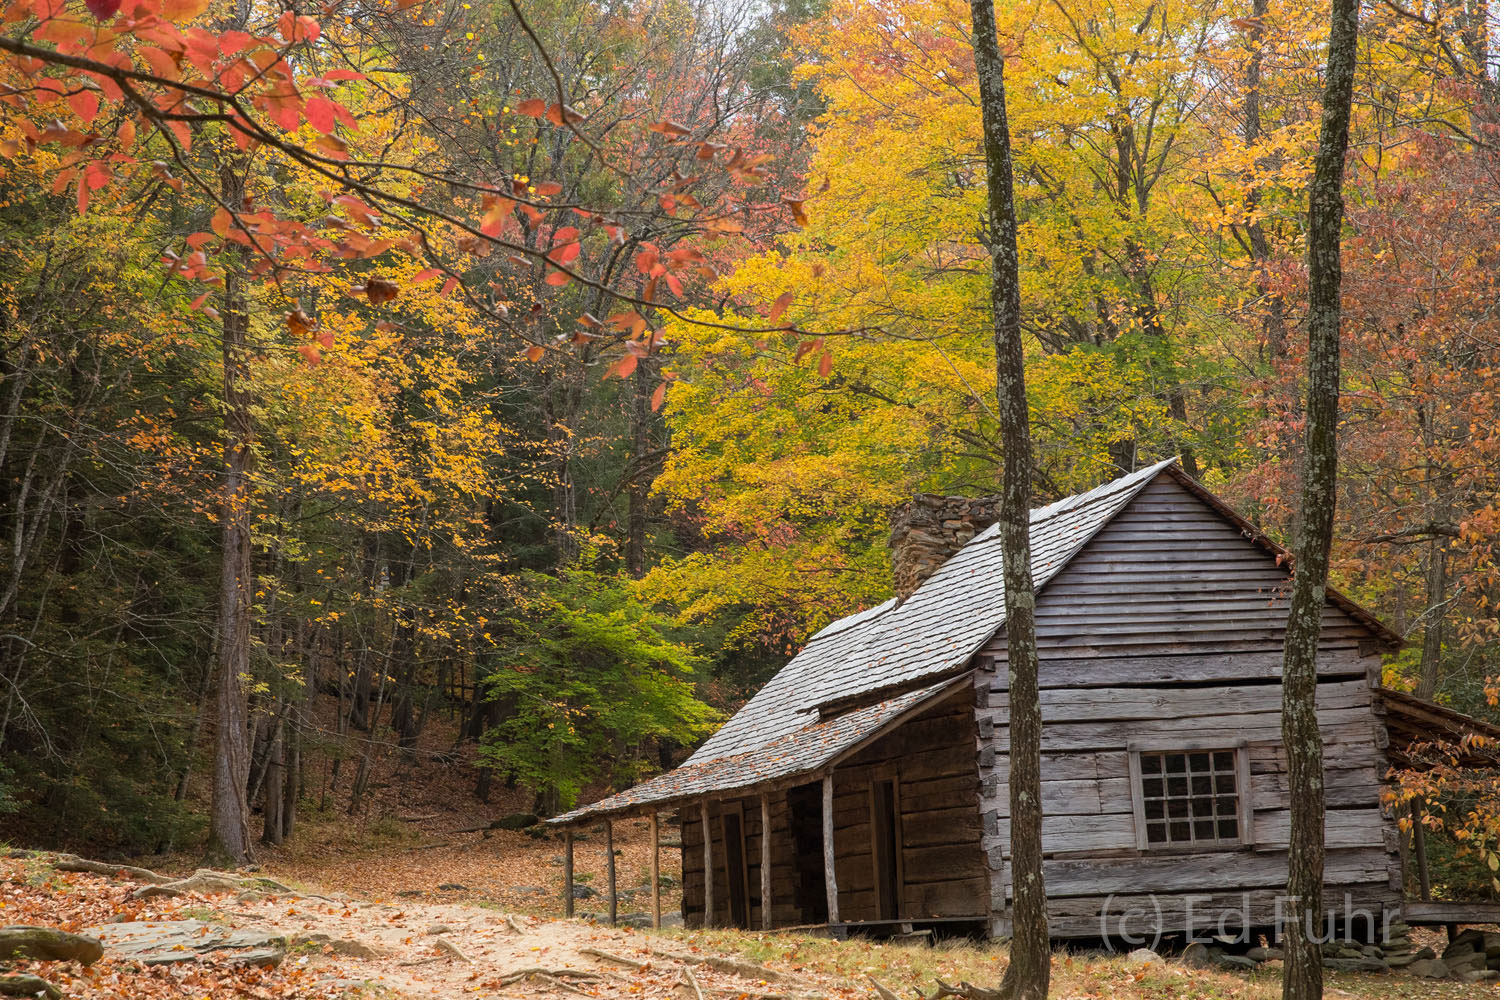 Fall colors surround Bug Ogle cabin along Roaring Fork.  The cabin was built in the 1880s is one of the earliest "saddlebag"...